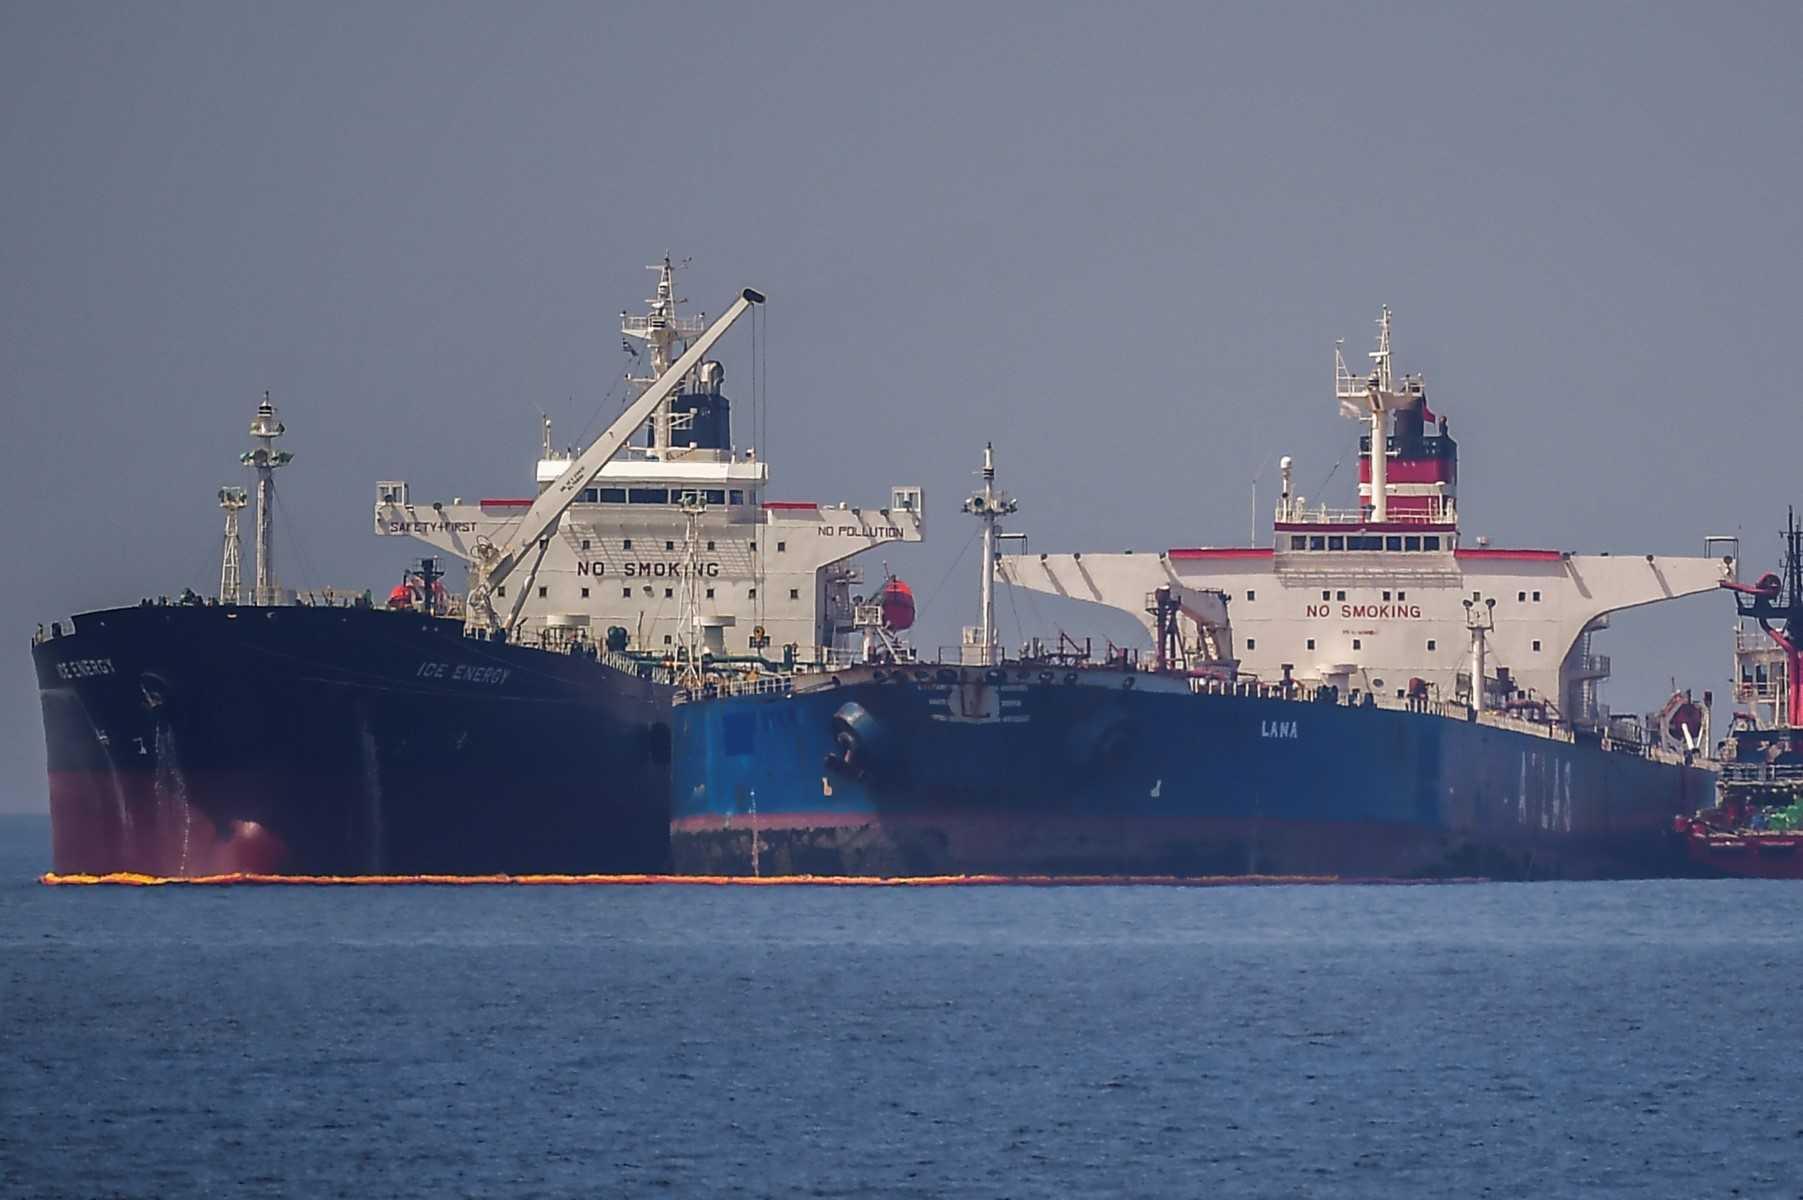 The Liberian-flagged oil tanker Ice Energy (left) transfers crude oil from the Russian-flagged oil tanker Lana (right), off the shore of Karystos, on the Island of Evia, on May 29, 2022. Photo: AFP 